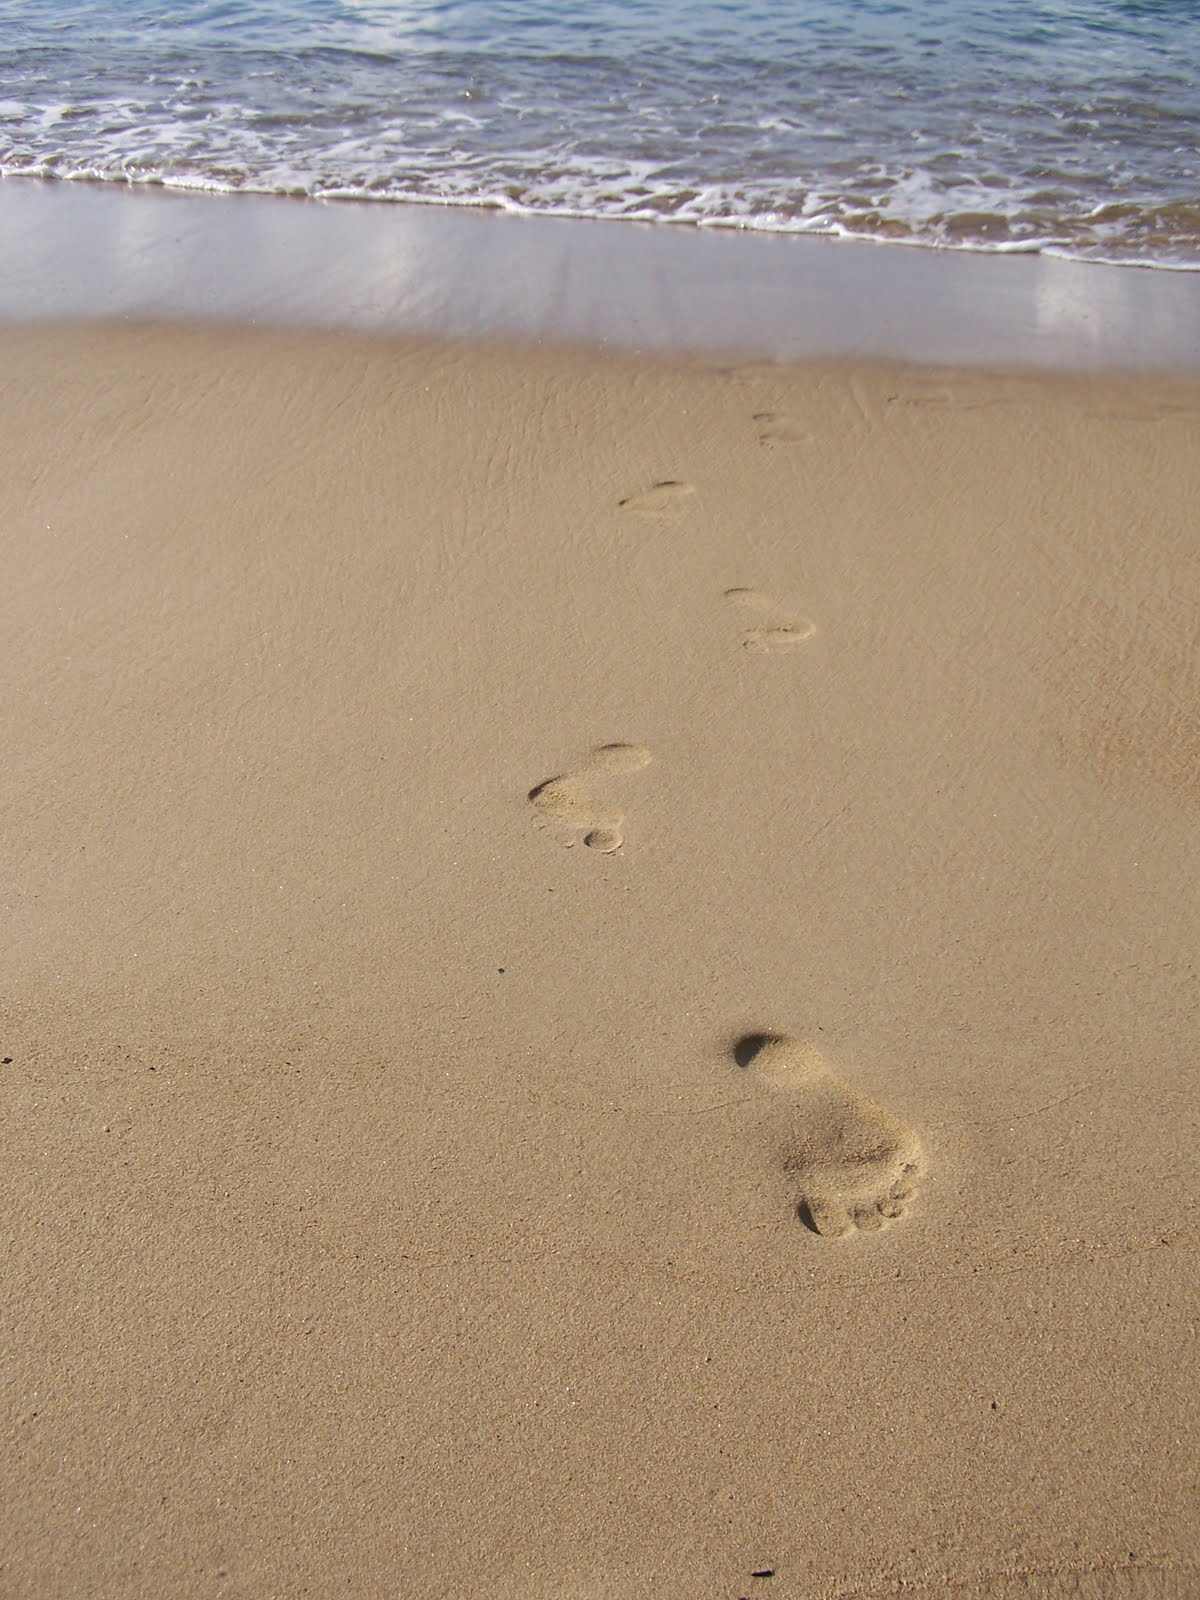 My Life As Me: Footprints in the Sand